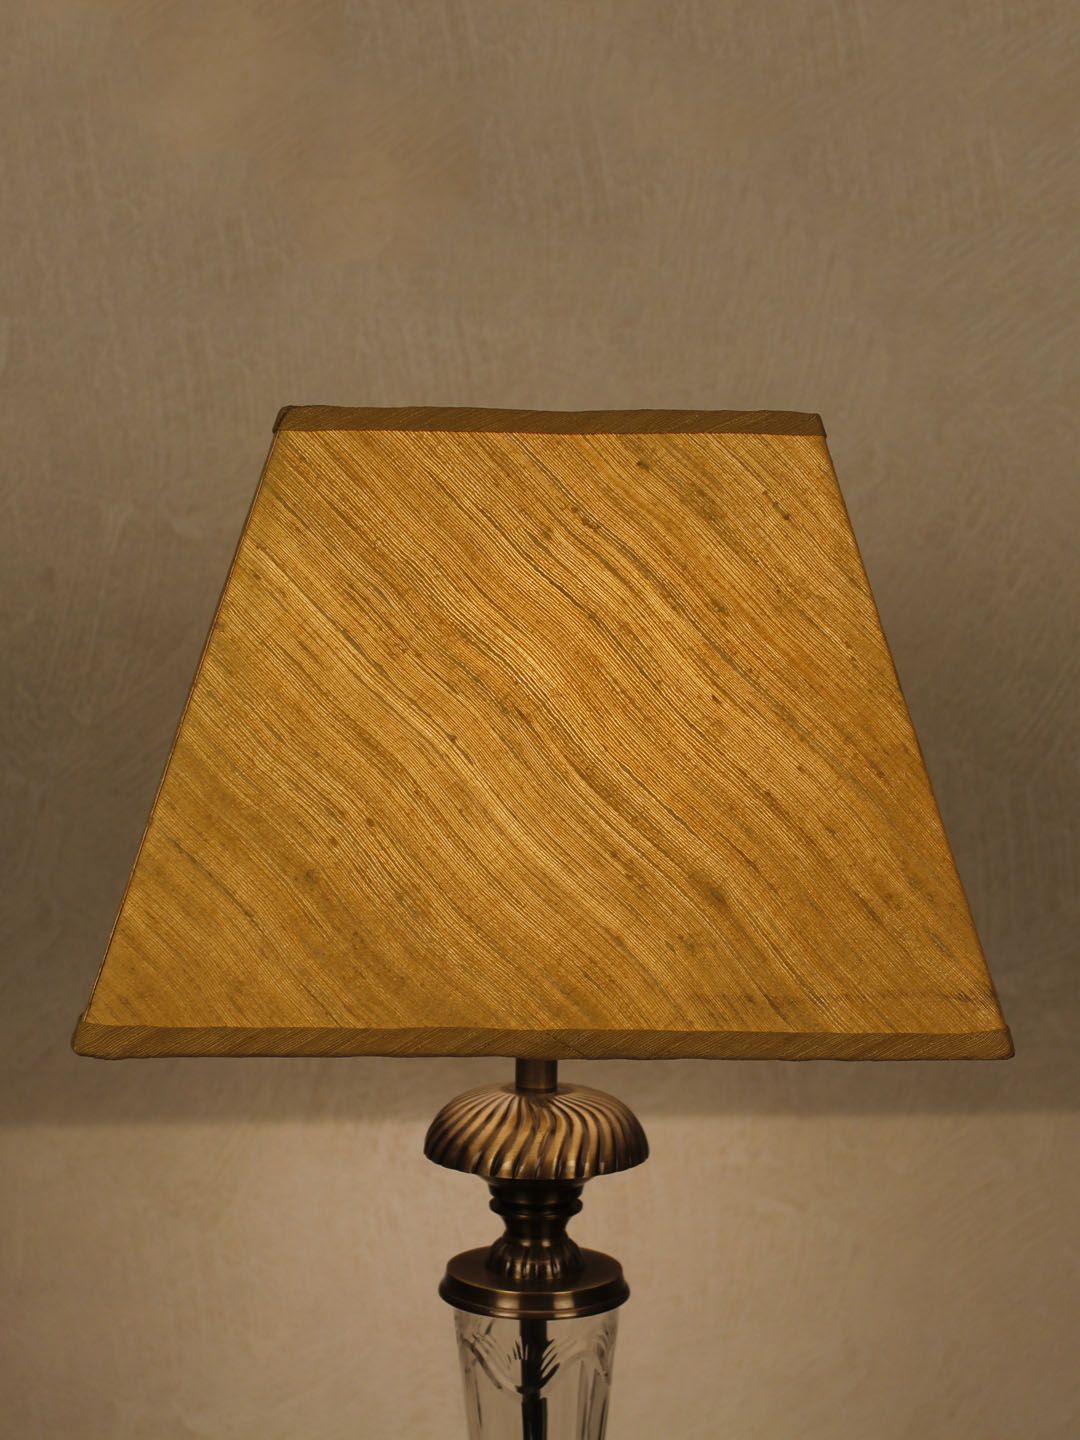 THE LIGHT STORE Beige Self-Design Table Top Lamp Shade Price in India